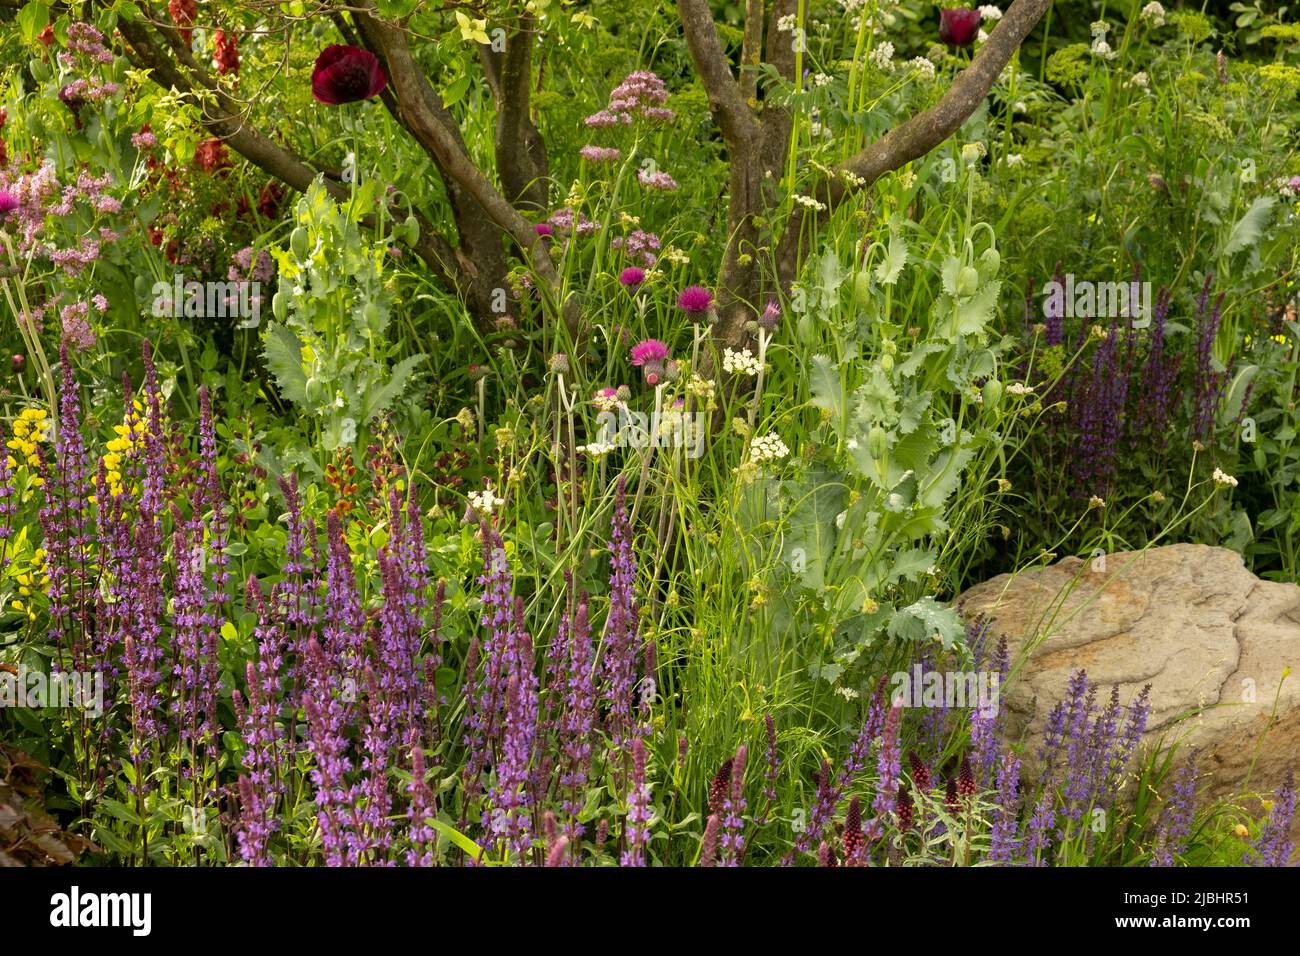 A close-up of planting in the Place2be Securing Tomorrow Garden designed by Jamie Butterworth to promote children’s mental health.  Plants include: Ci Stock Photo